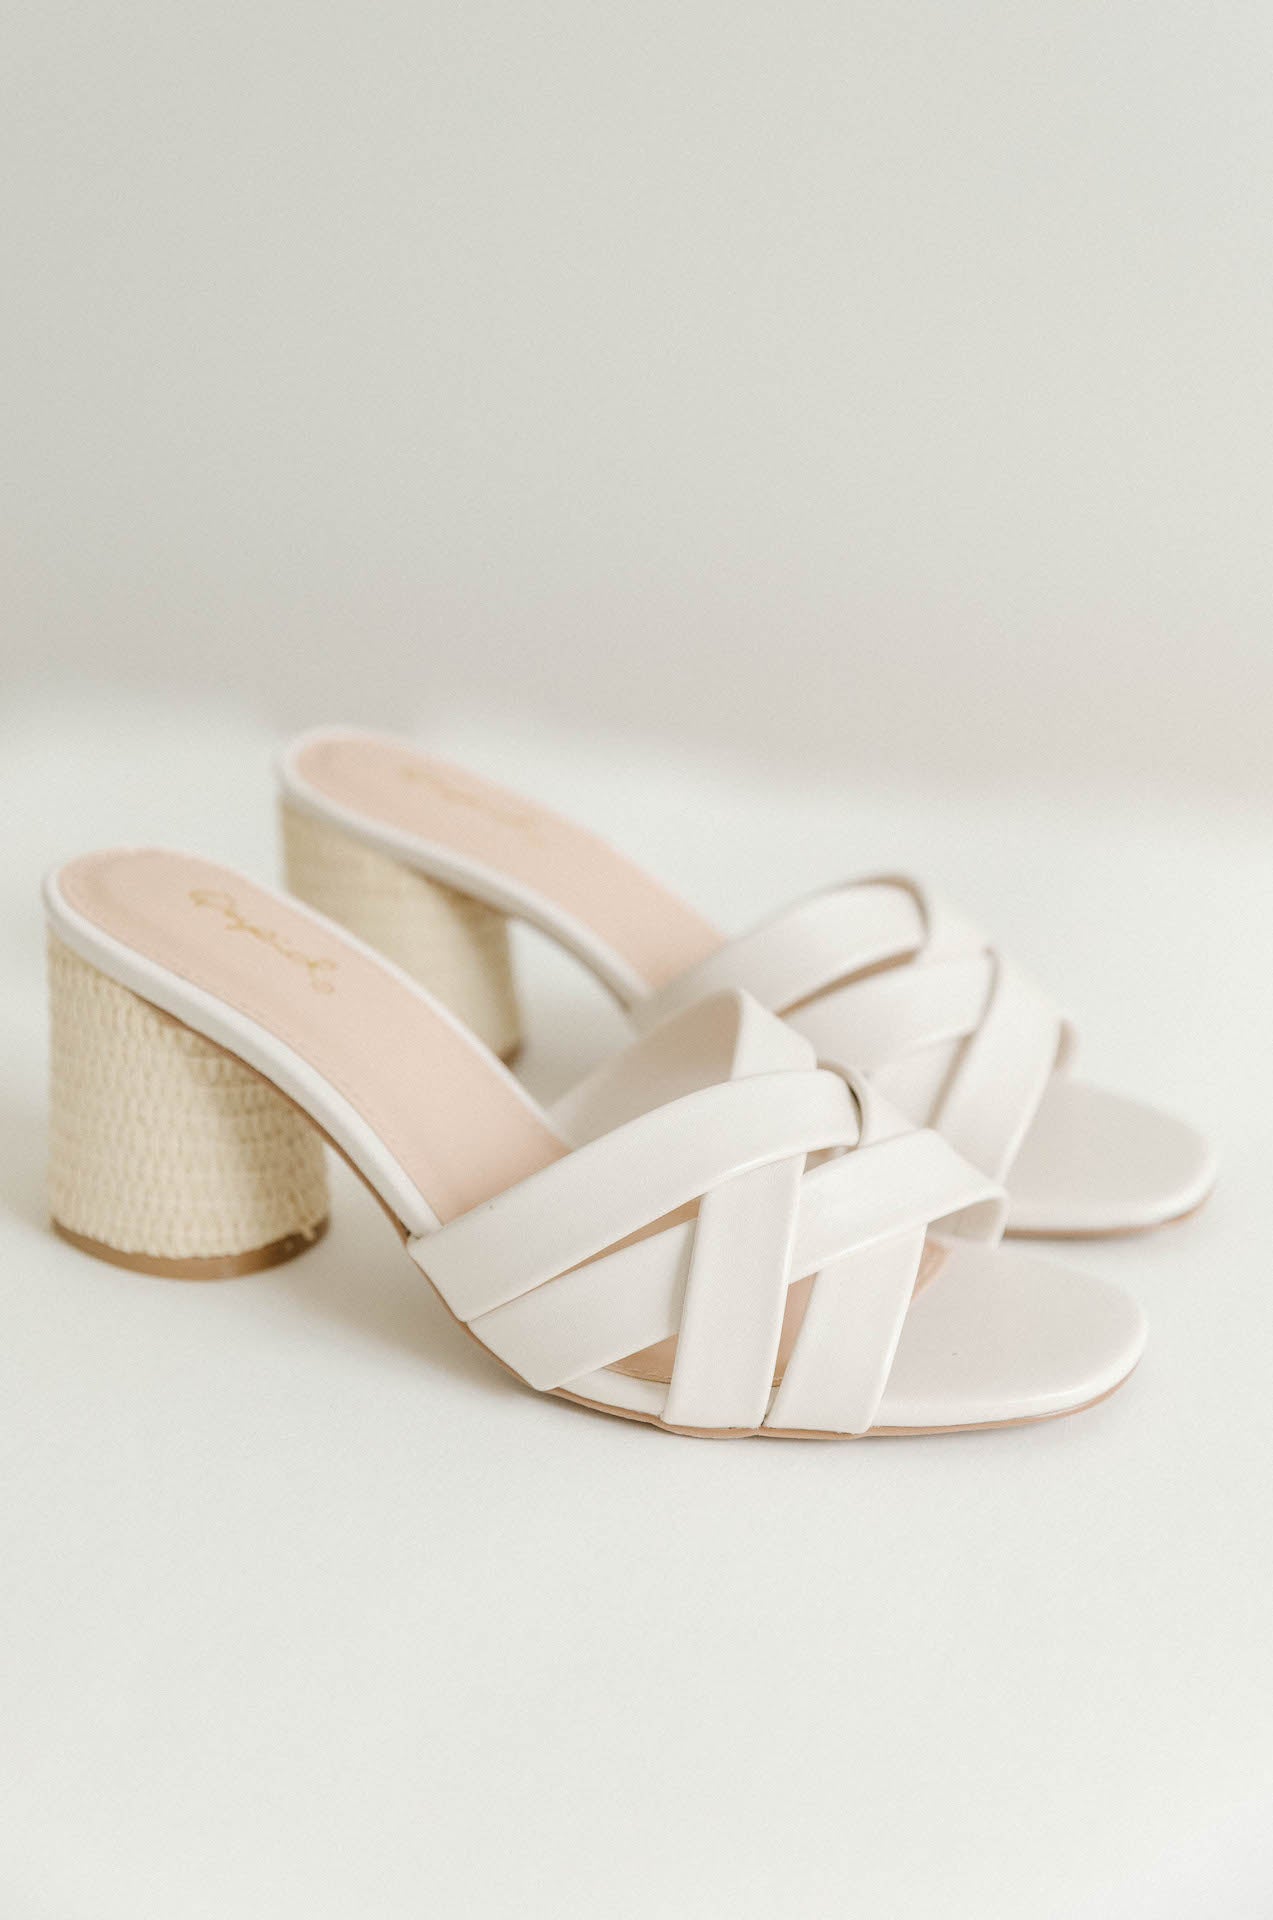 white woven leather heels